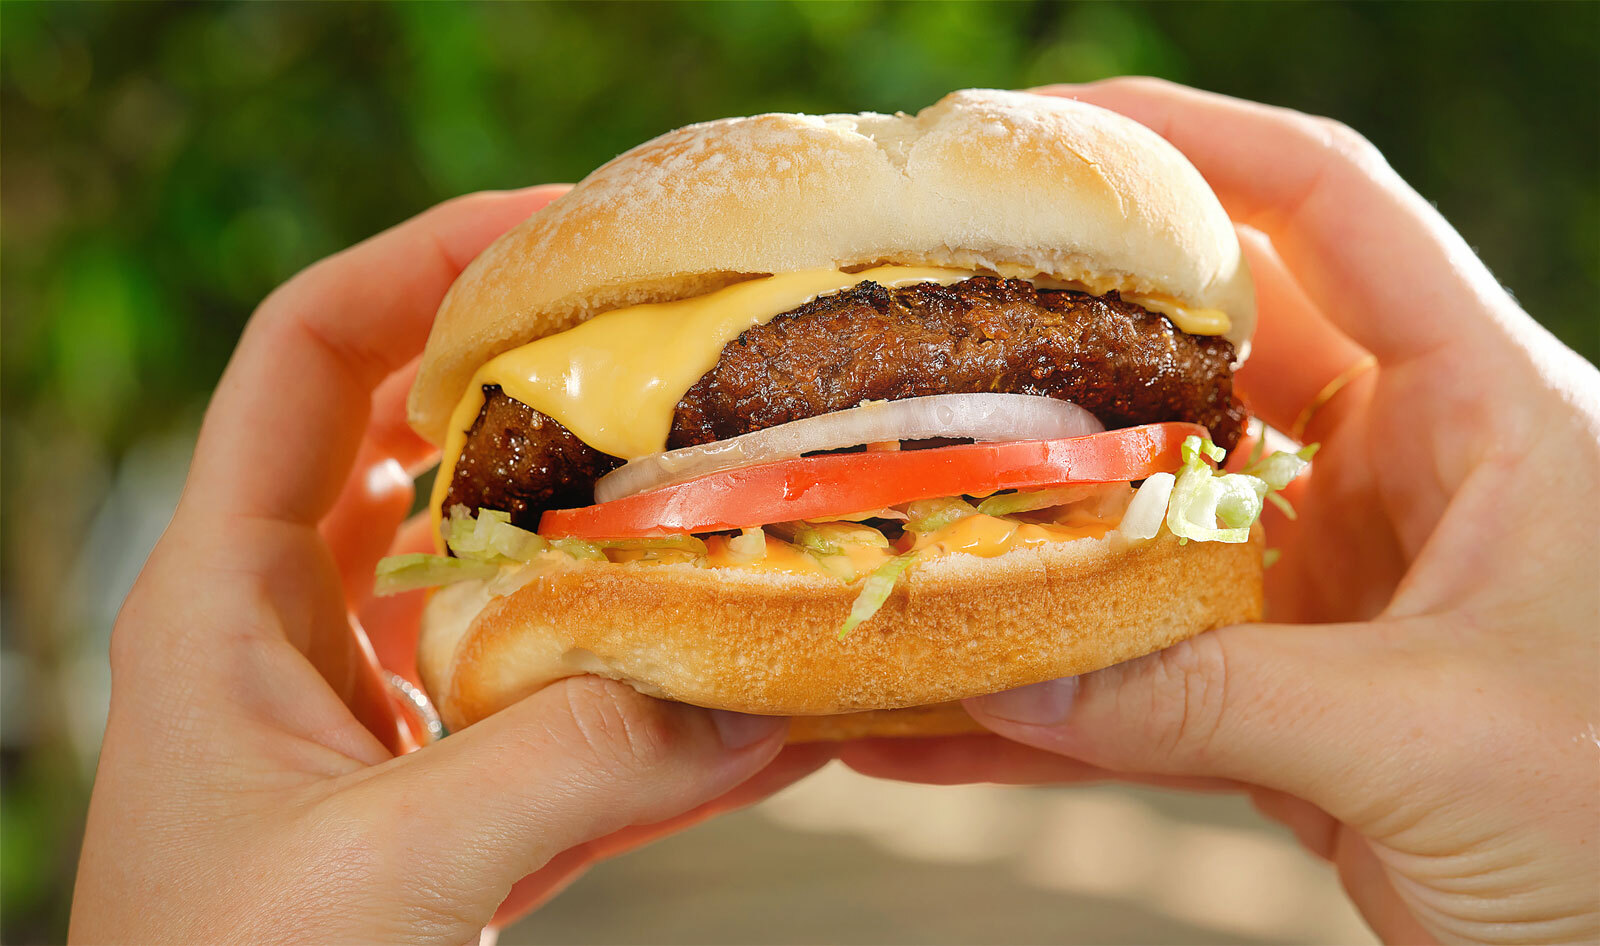 American Cancer Society Focuses Research on Vegan Meat With Help From Beyond Meat